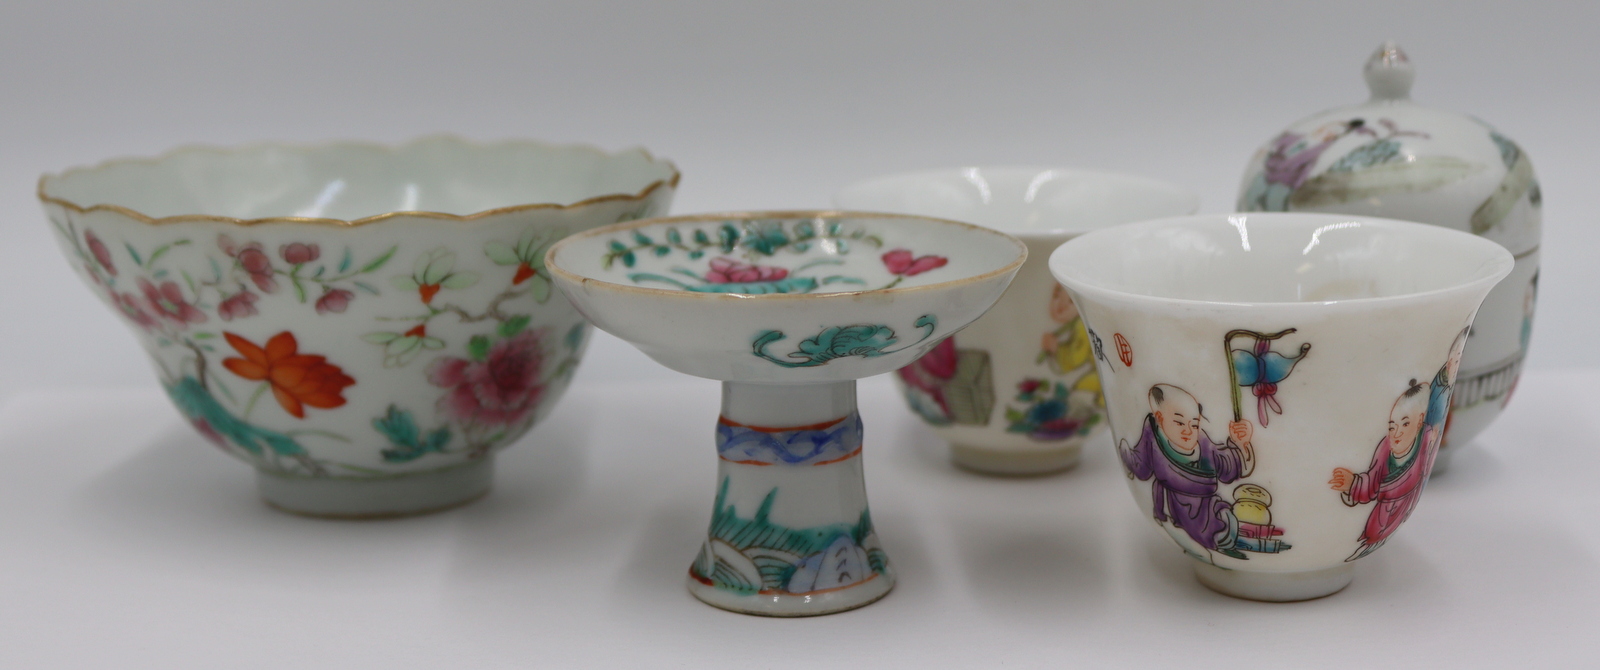 GROUPING OF CHINESE REPUBLIC PORCELAIN 3bd278